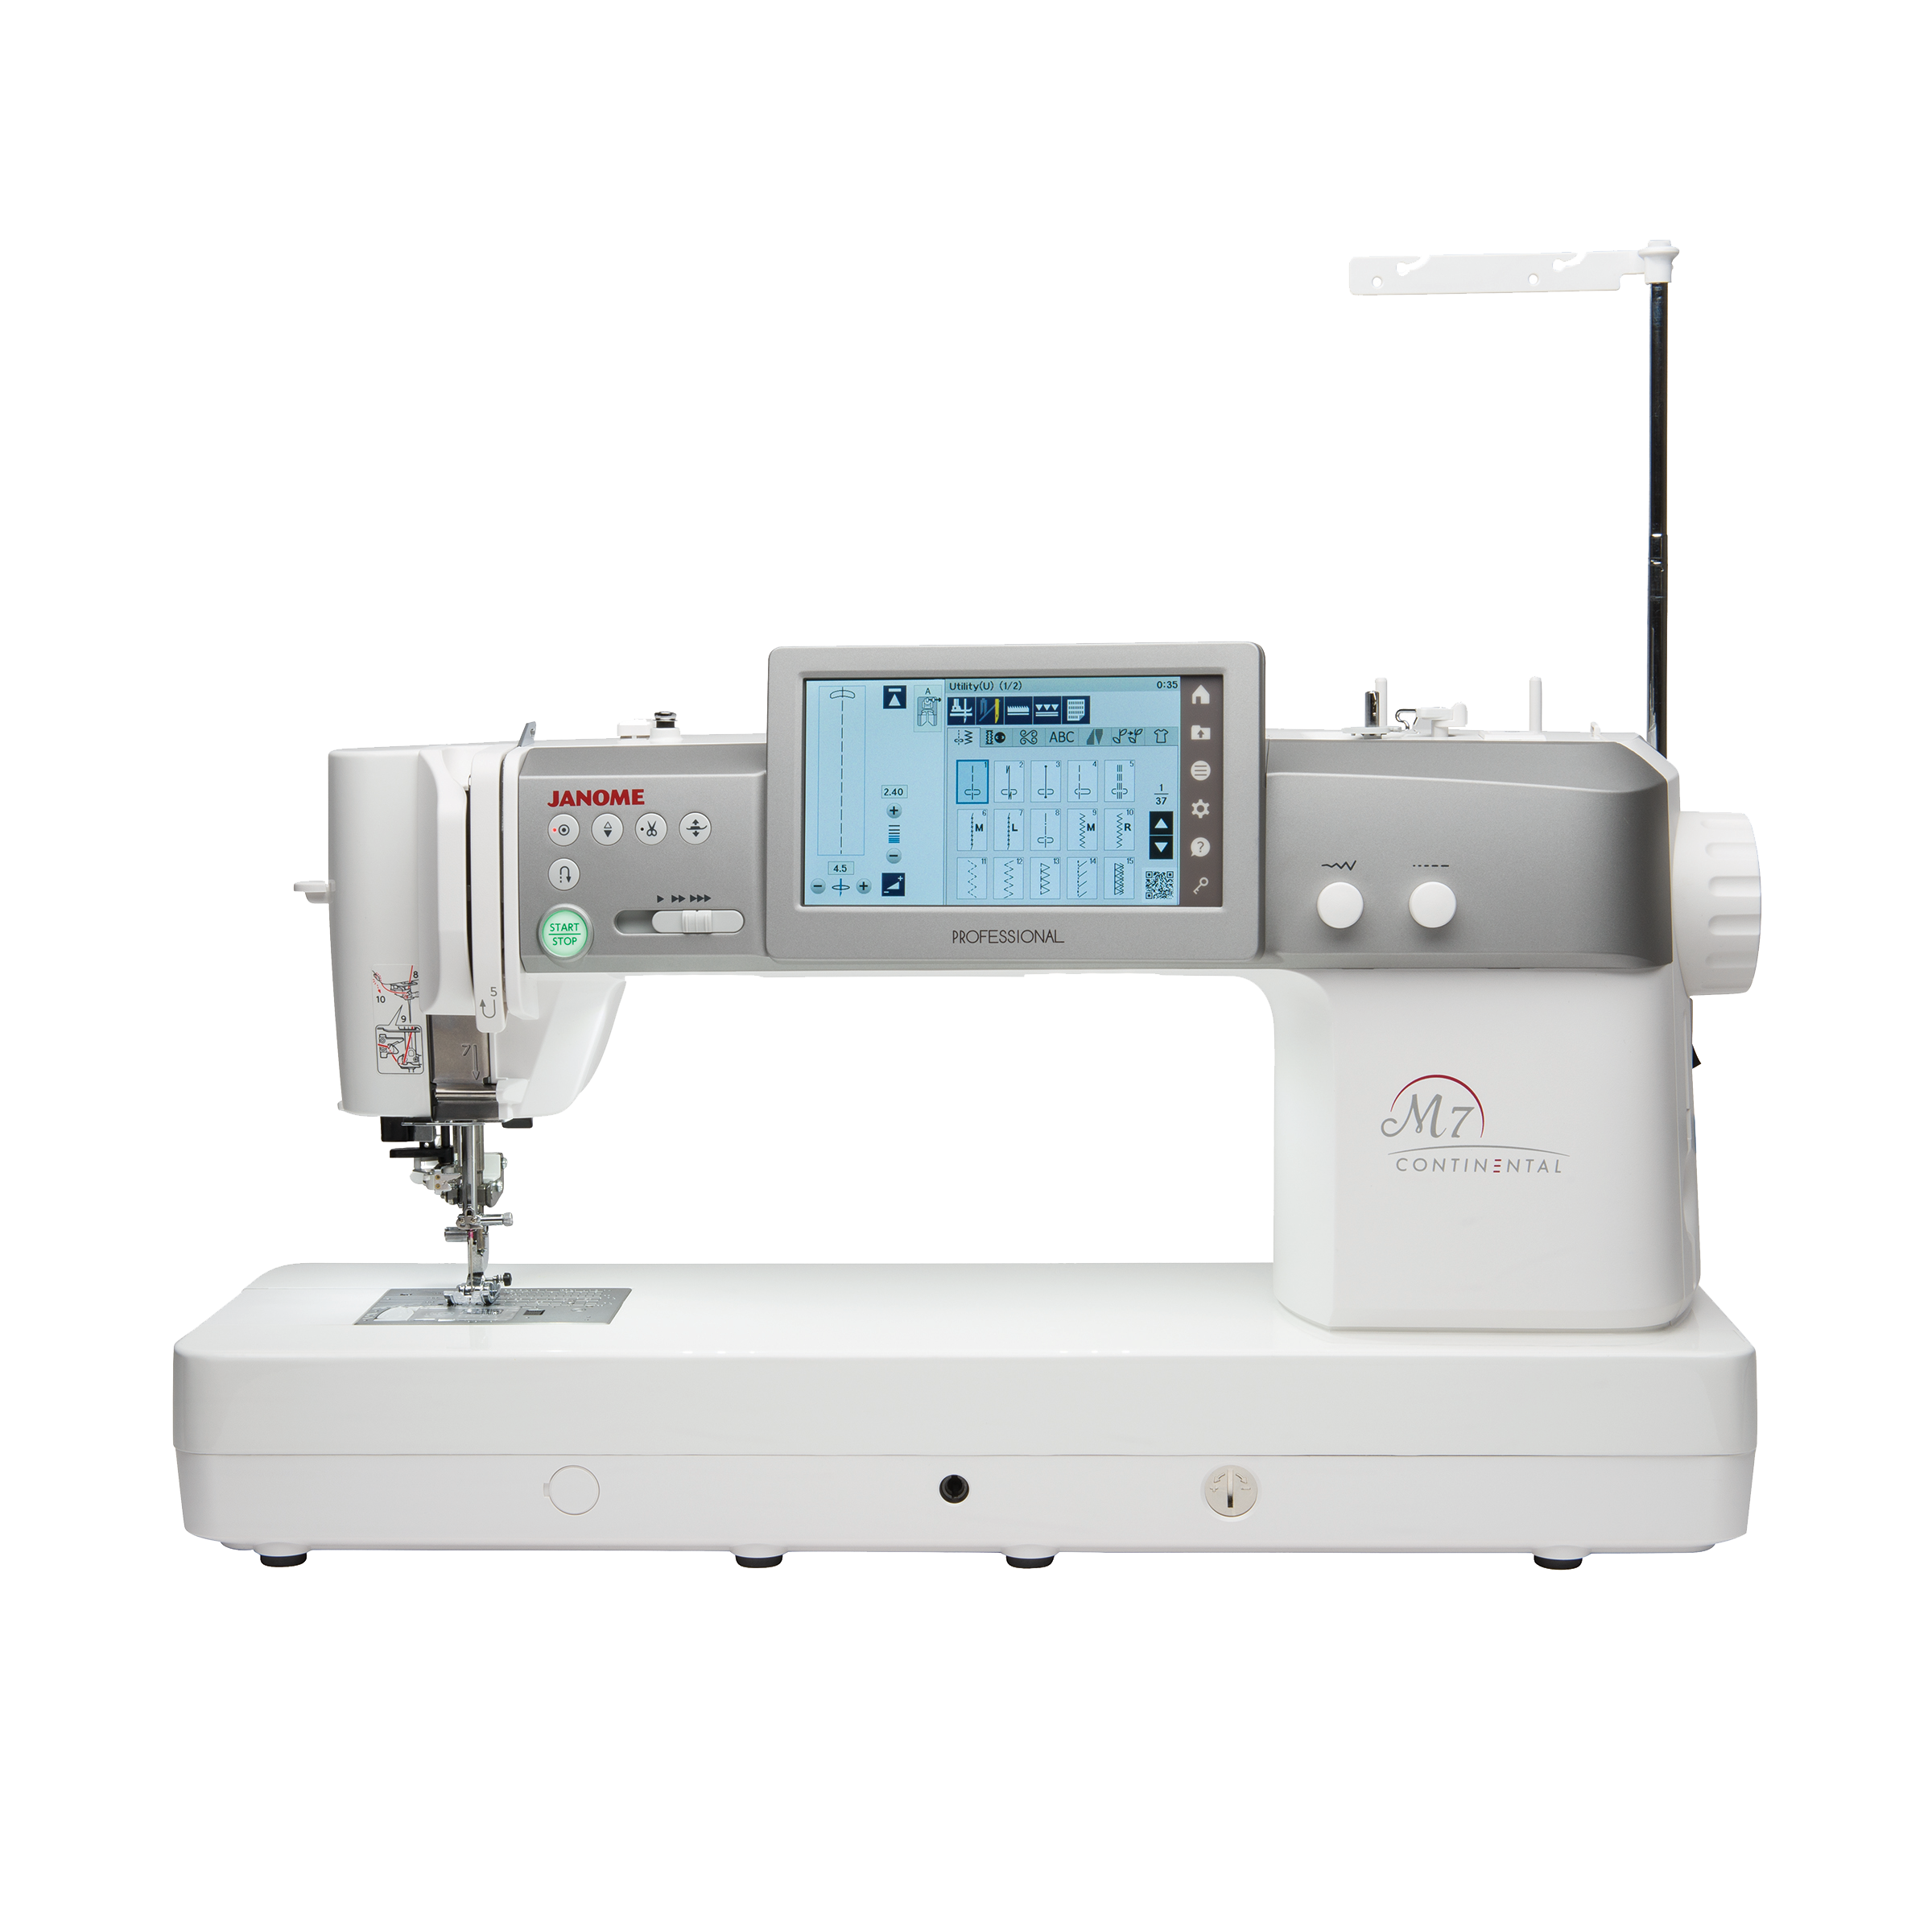 Janome Continental M7 Professional Sewing and Quilting Machine for Sale at World Weidner